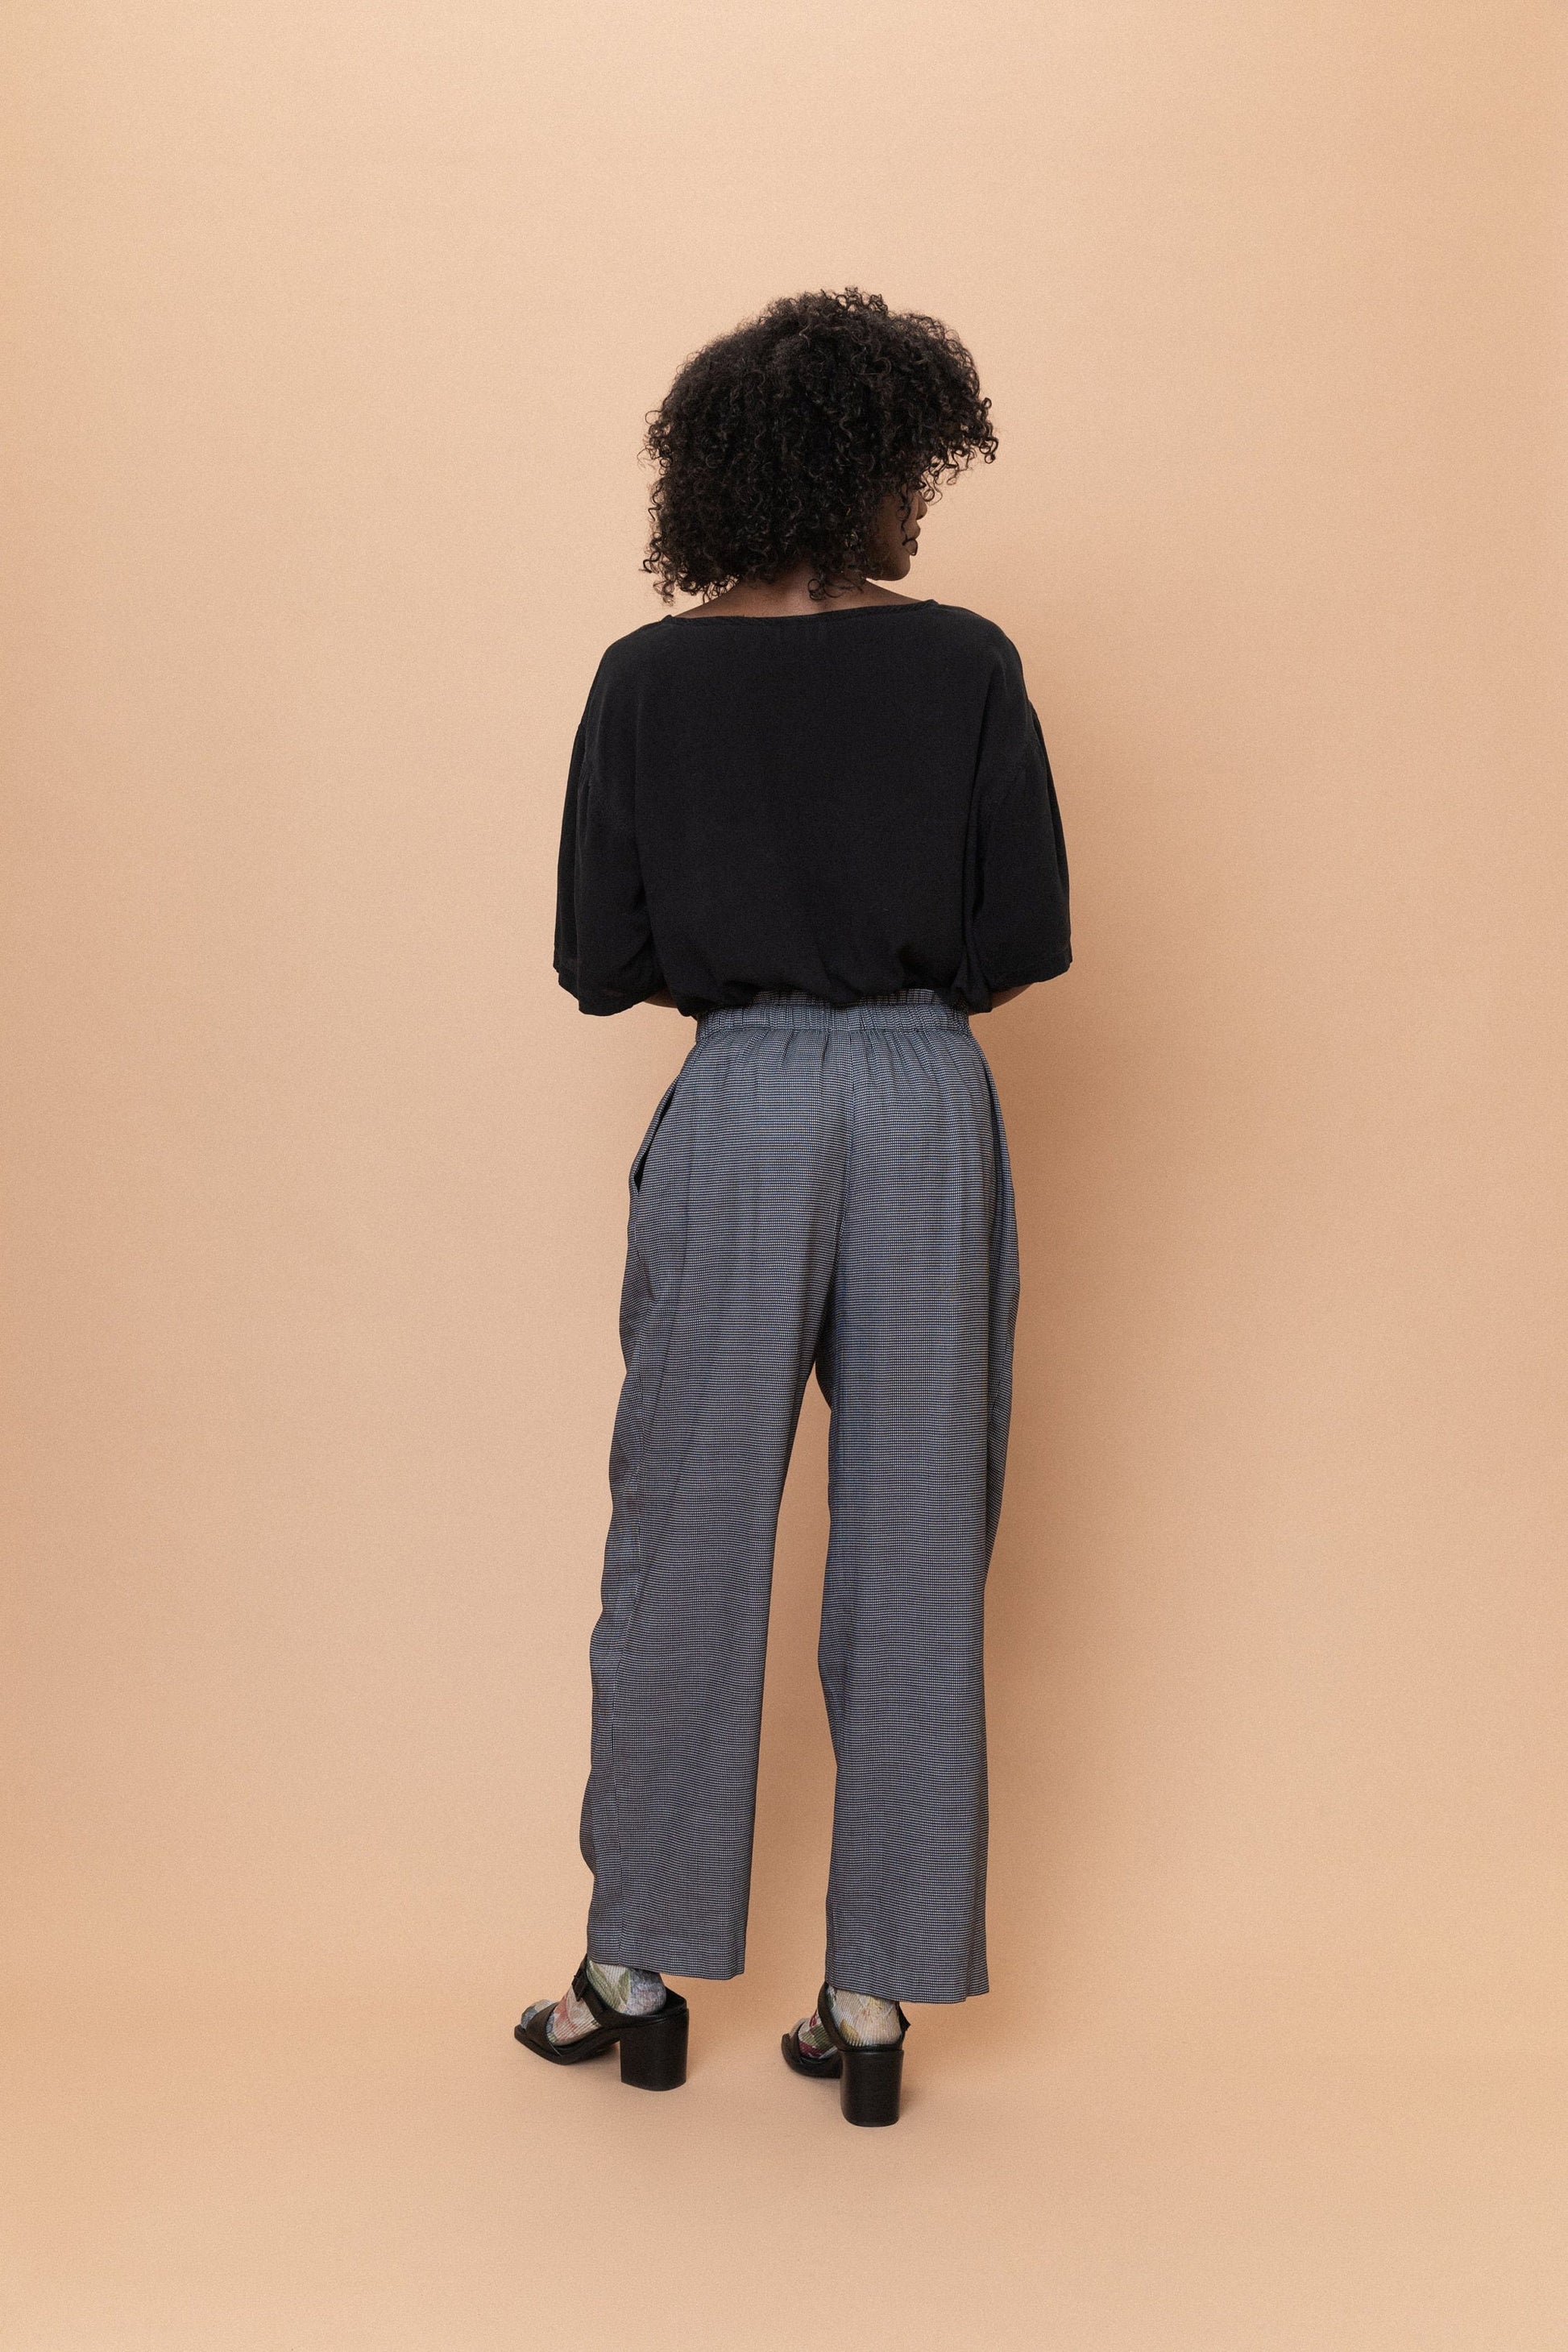 Vintage Navy Checkered Relaxed Pants (S/M)